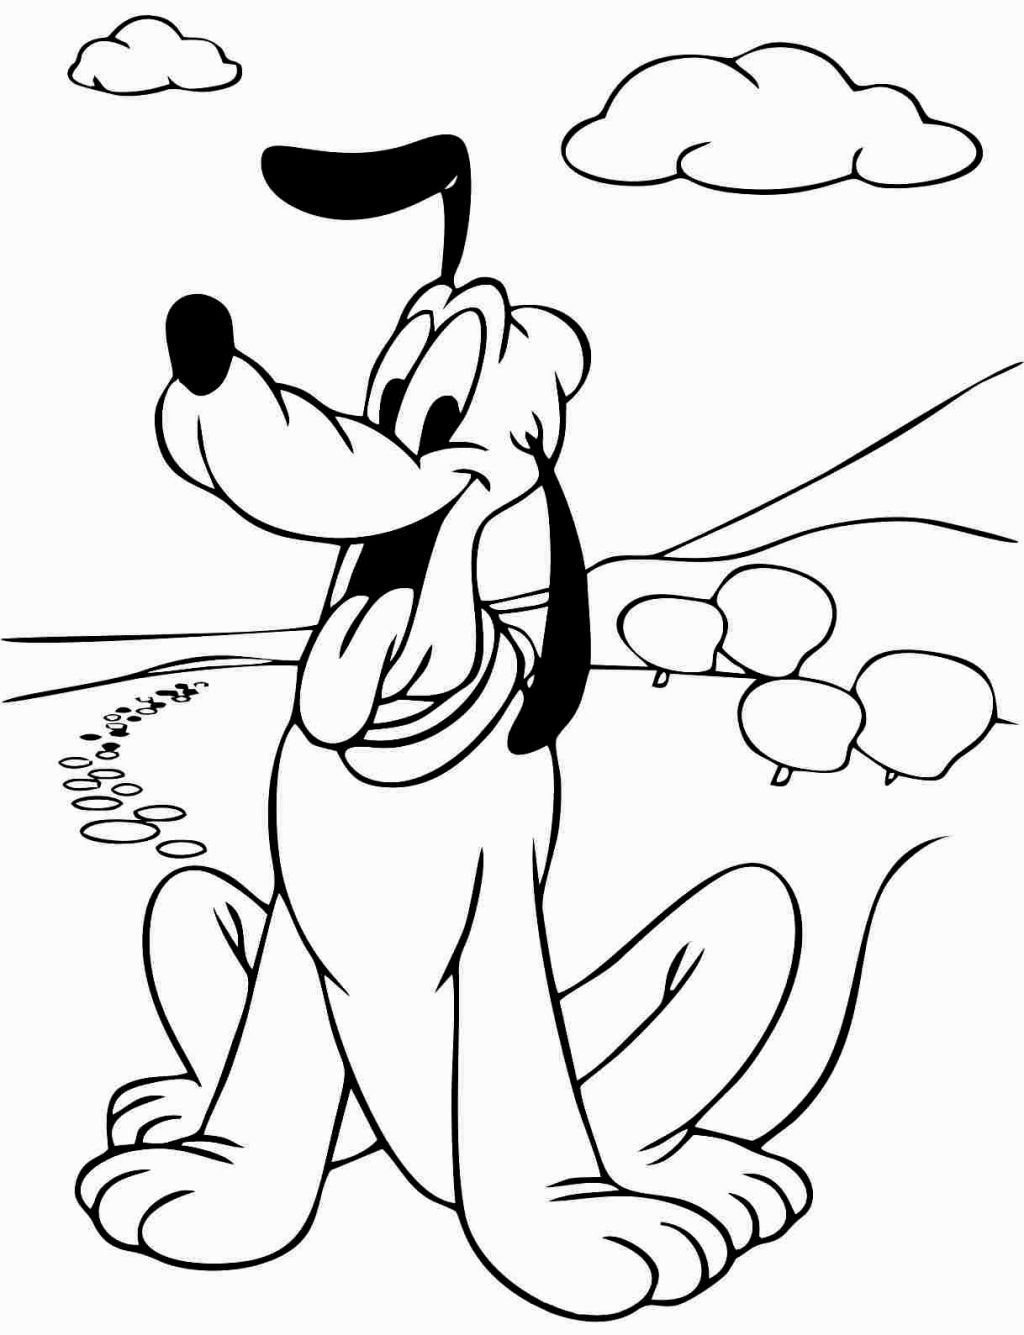 Pluto Coloring Pages Pluto Coloring Pages Coloring Pages